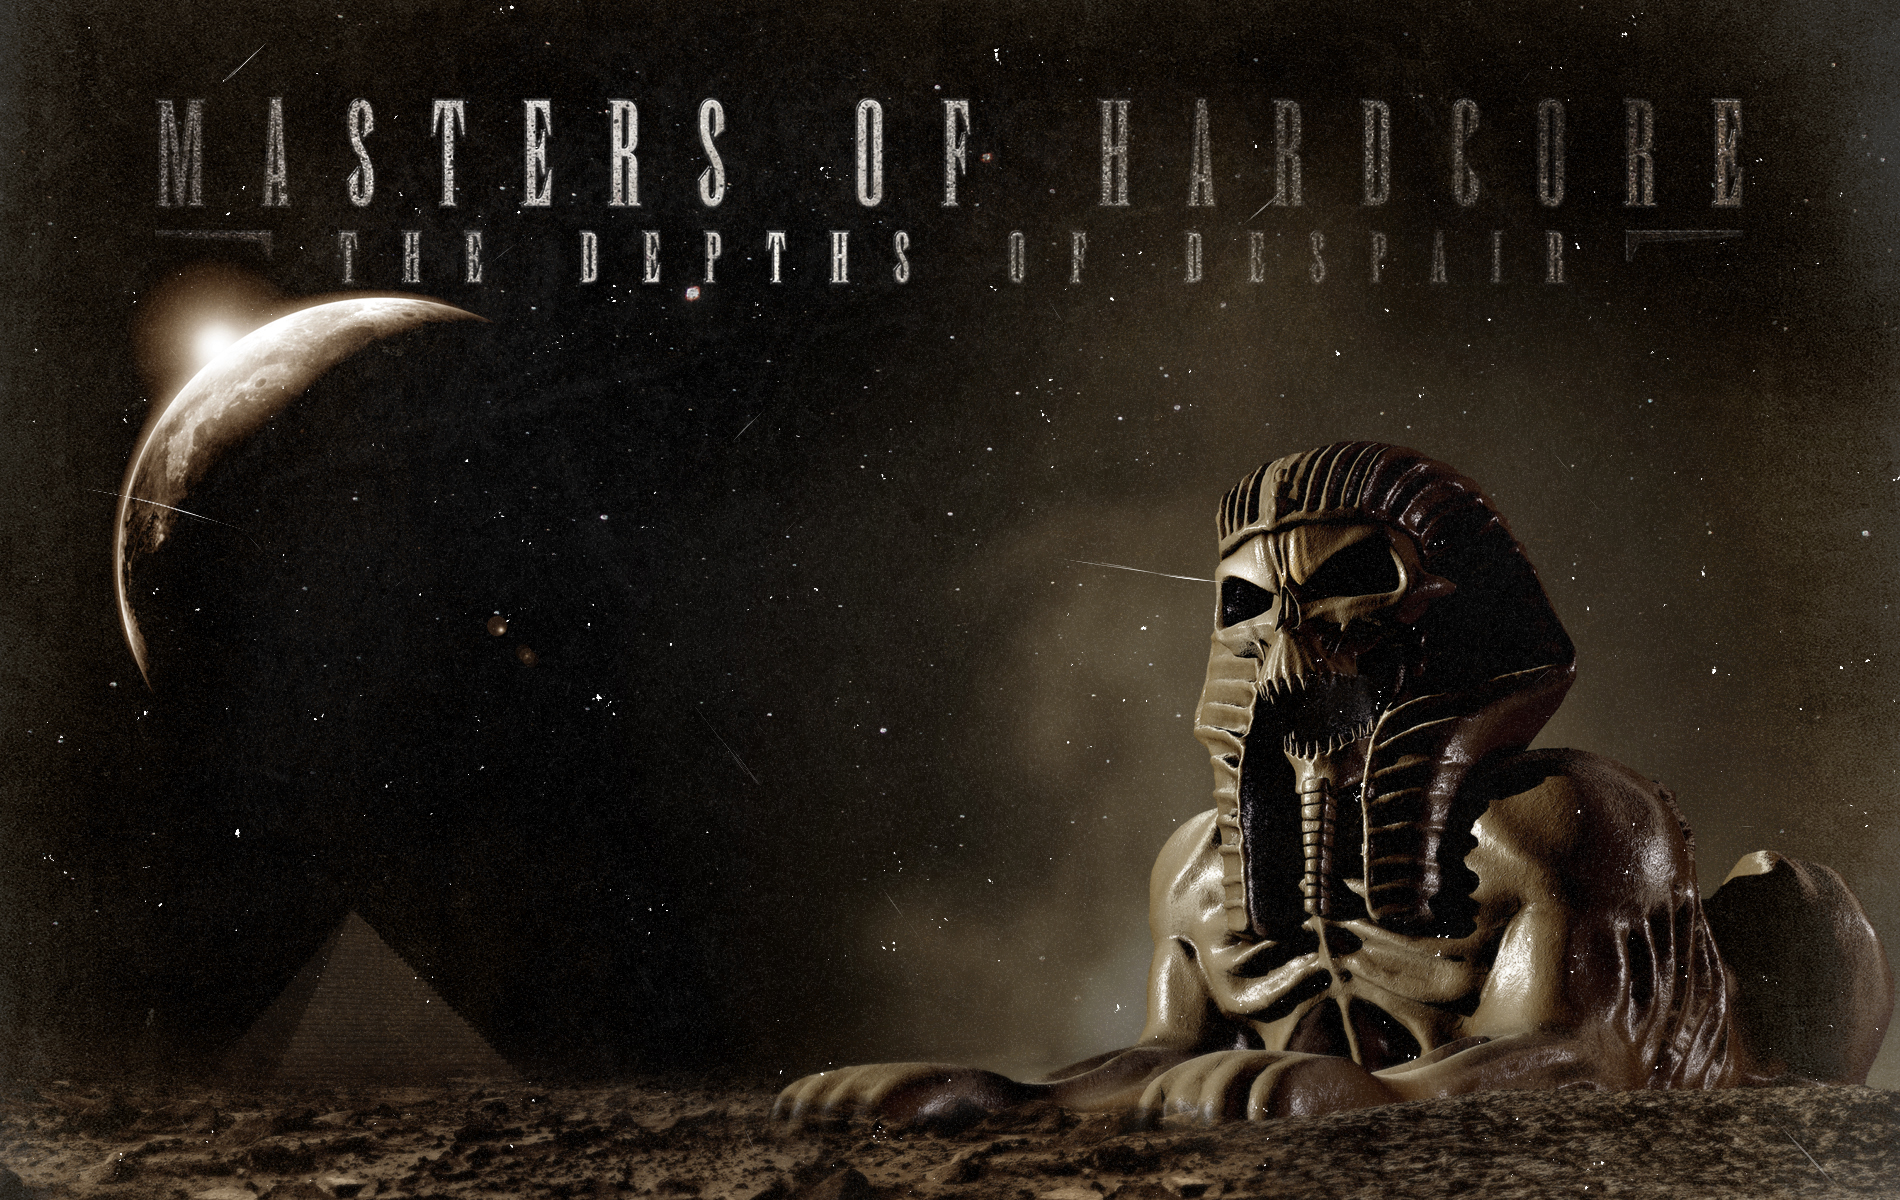 masters of hardcore wallpaper,album cover,font,darkness,photography,digital compositing